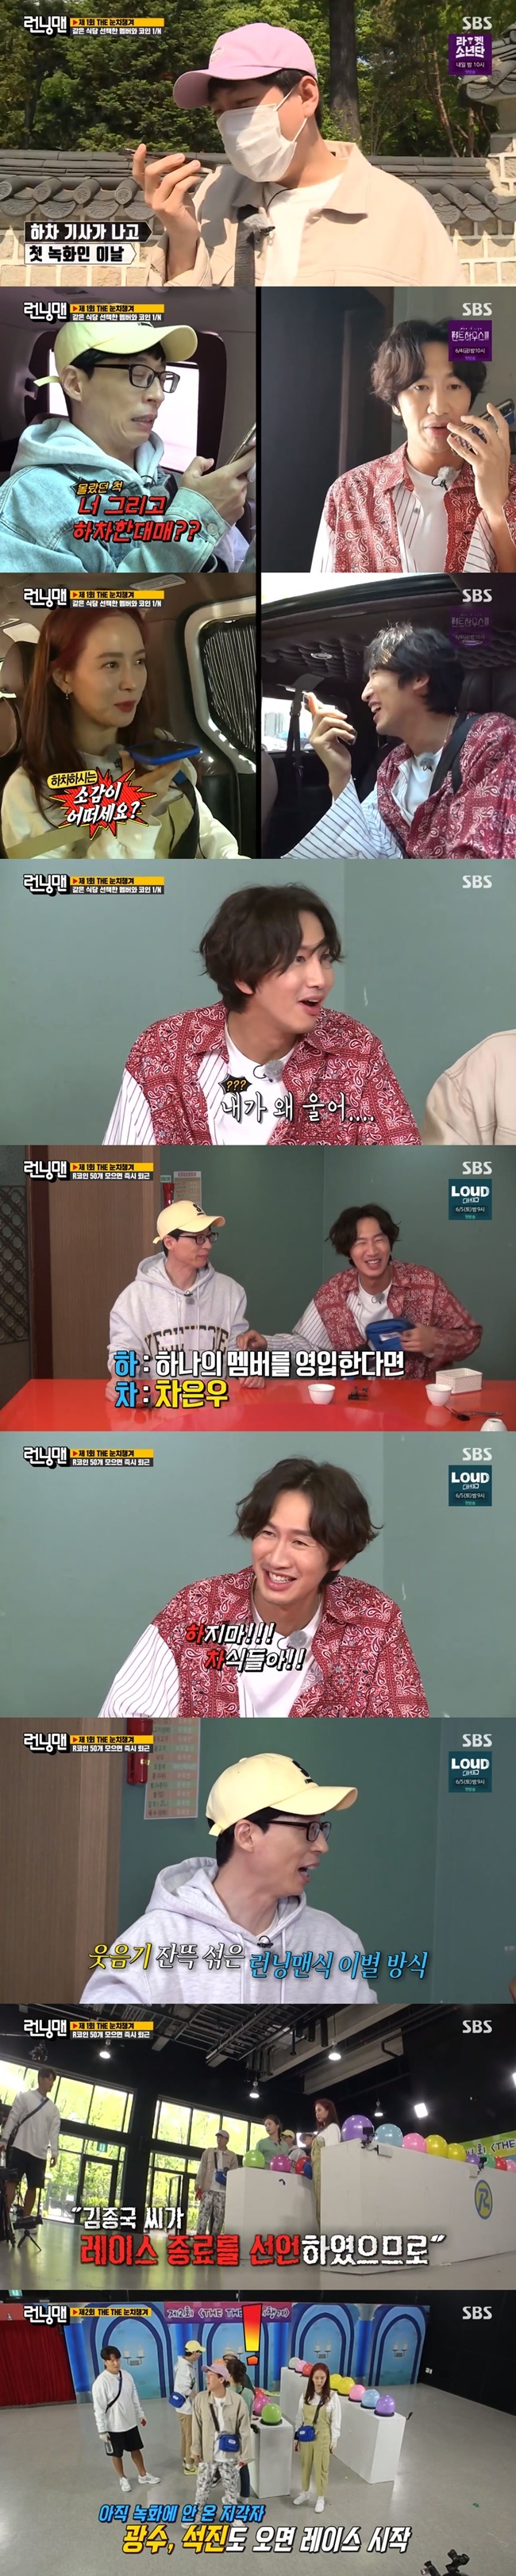 Yoo Jae-Suk expressed regret at the departure of Lee Kwang-soo.On May 30, SBS Running Man, THEs Noticing Race was held, which can be ranked first only if it is not noticed.The production team said, Todays fast-paced members can get more COIN, THEs awareness and race, he said. The work hours vary according to the acquisition COIN.Members who have 50 Choices first leave RCOIN and can acquire additional information through missions as well as missions.The pre-mission was breakfast menu Choices; each had a one-ninth COIN of the people who gathered for choices of Korean and Chinese.Above all, Lee Kwang-soo received the attention of the members as the first recording after the news of getting off.Kim Jong-kook, who saw this, joked, Did you grow a beard to look like a struggling person?Yoo Jae-Suk also said, Do not take the price of rice in the light.Members frequently mentioned the news of Lee Kwang-soo getting off.Yoo Jae-Suk said, Lets try to move to get off. If you recruit my member, Jung Eun-woo.Haha then said, If you add ha (han) more, youll be cha Tae-hyun. Eventually Lee Kwang-soo responded, Dont ha tea.Among them, Ji Suk-jins departure was decided.In addition to Korean food Choices, chopsticks Choices, scissors rocks, Lee Kwang-soo presented two COINs and 50 RCOINs gathered to leave.Ji Suk-jin expressed regret over his desire for a quantity of can you do without me? But Lee Kwang-soo became the main character of his second work day.Embarrassed Lee Kwang-soo called Ji Suk-jin and said he was not feeling very good.Ji Suk-jin comforted him, You havent even left a few times.The first of this mission was a game that punched 20 balloons on the table; however, the members did not put a doubt on the Hidden Mission.Kim Jong-kook, who saw this, found a bottle of bottled water with a red sticker in front of the production team, while the production team blew whistles and declared Race is over.The water bottle had the phrase Race End, and when it was discovered, it was a rule that the race ended.In addition, the production team declared, I will start the race by taking care of THE THE.I will start when Ji Suk-jin and Lee Kwang-soo arrive late for recording, the production team said.The members urgently called Ji Suk-jin and Lee Kwang-soo; the second race had to win 70 RCOINs before leaving work.